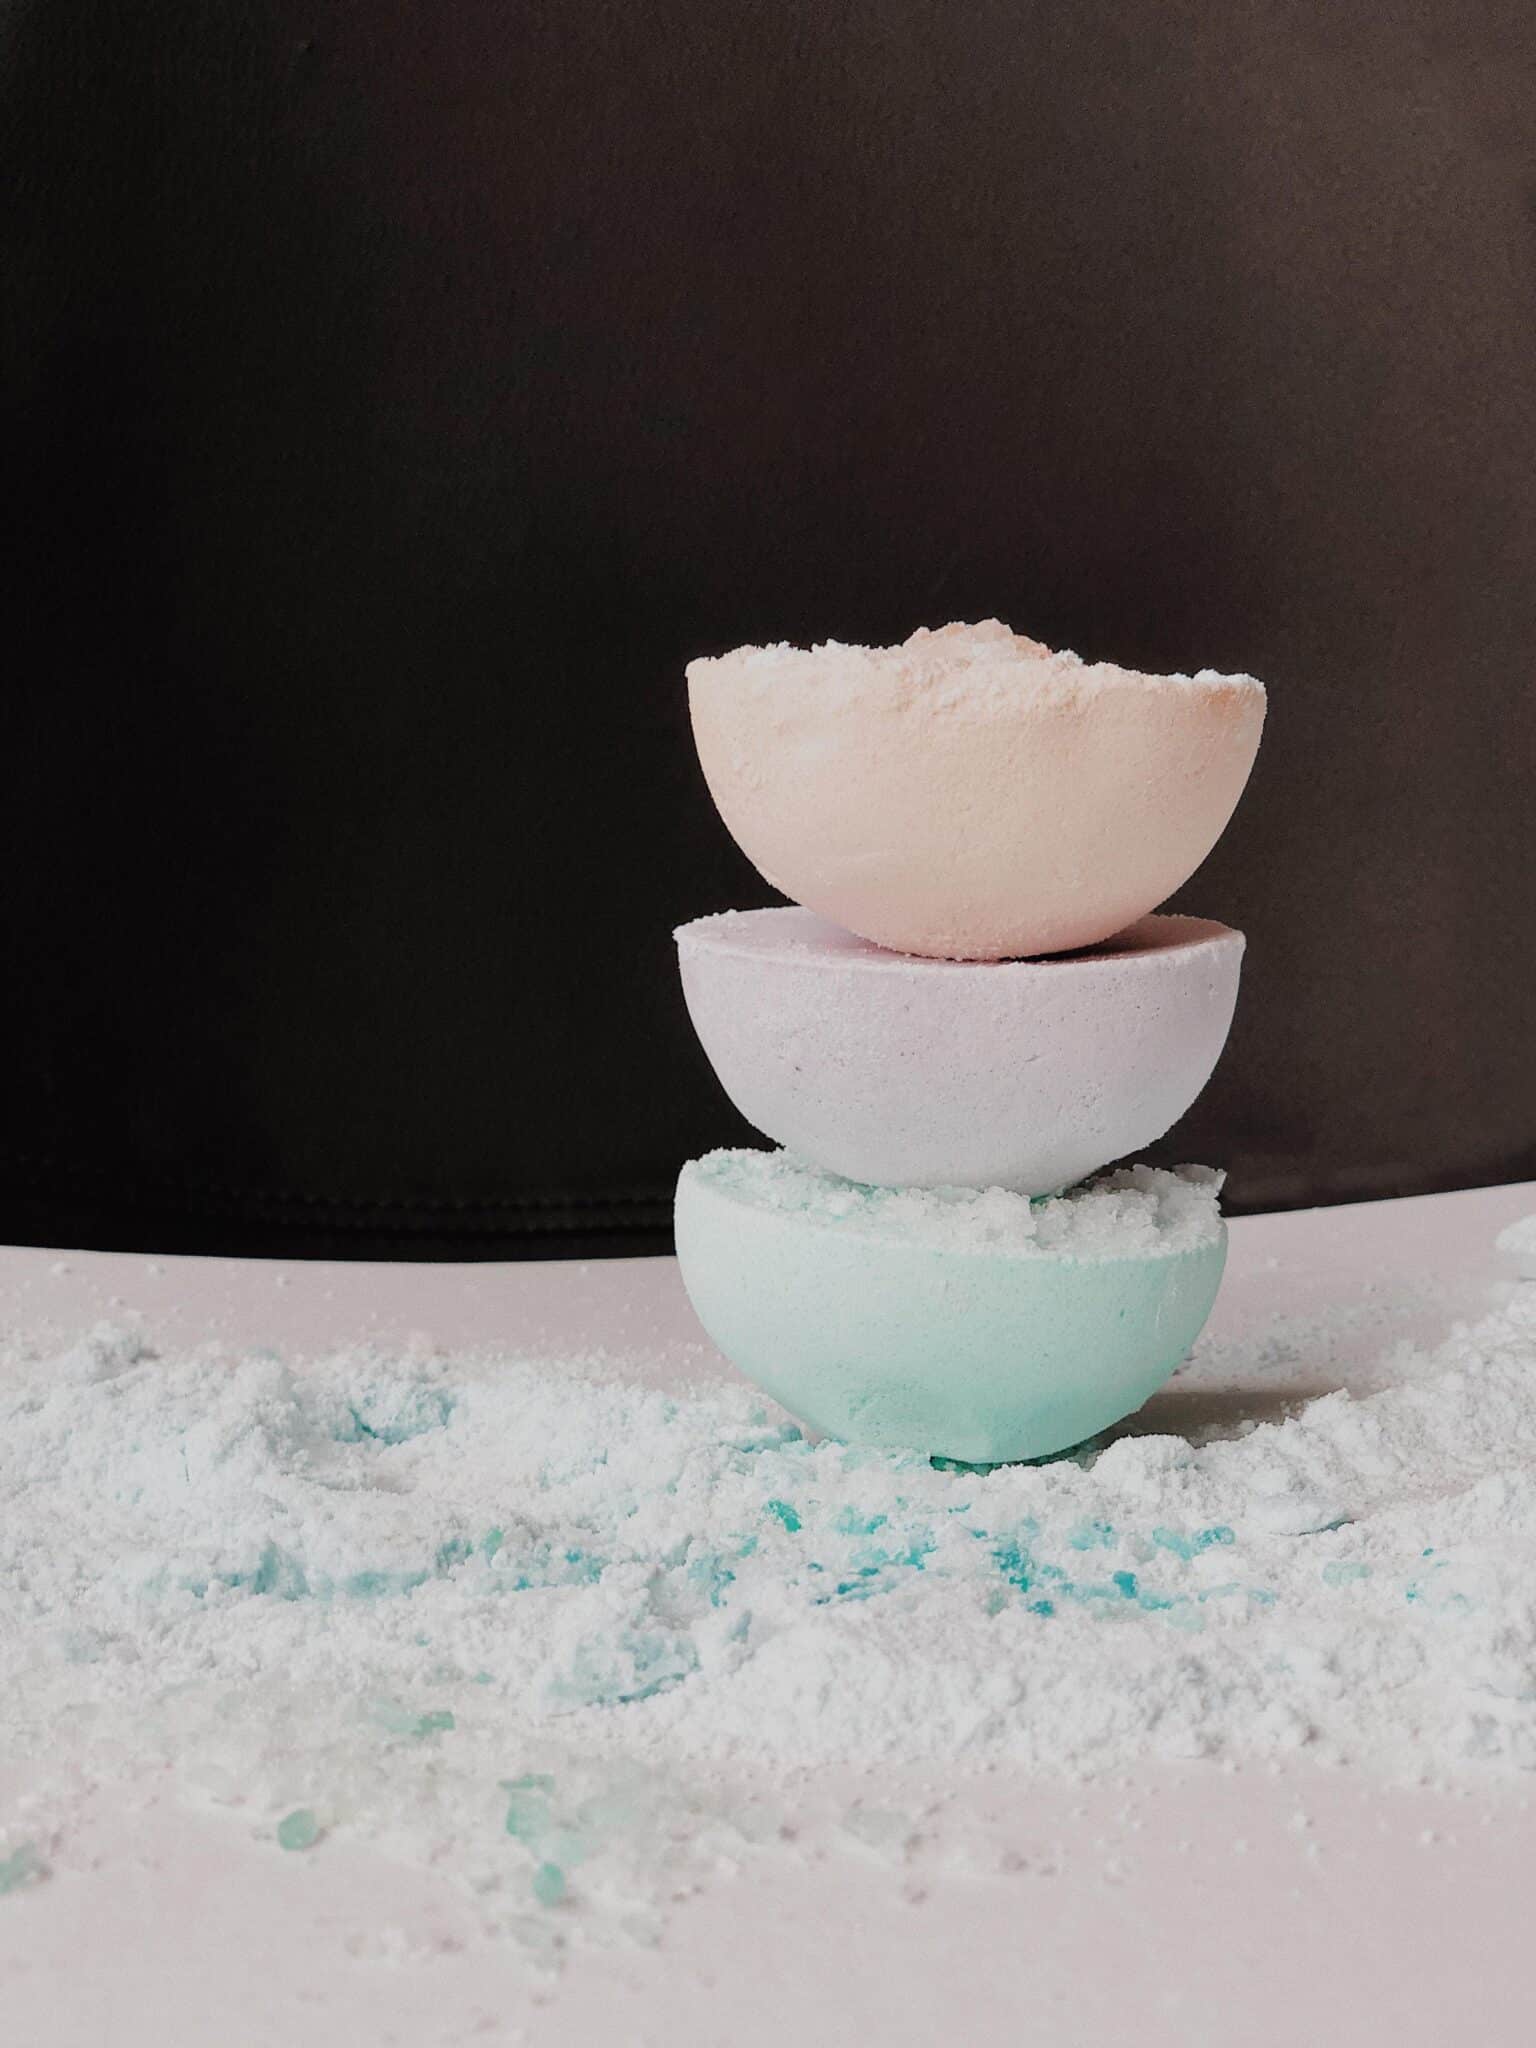 5 Best CBD Bath Bombs for 2021: Reviews and Guide